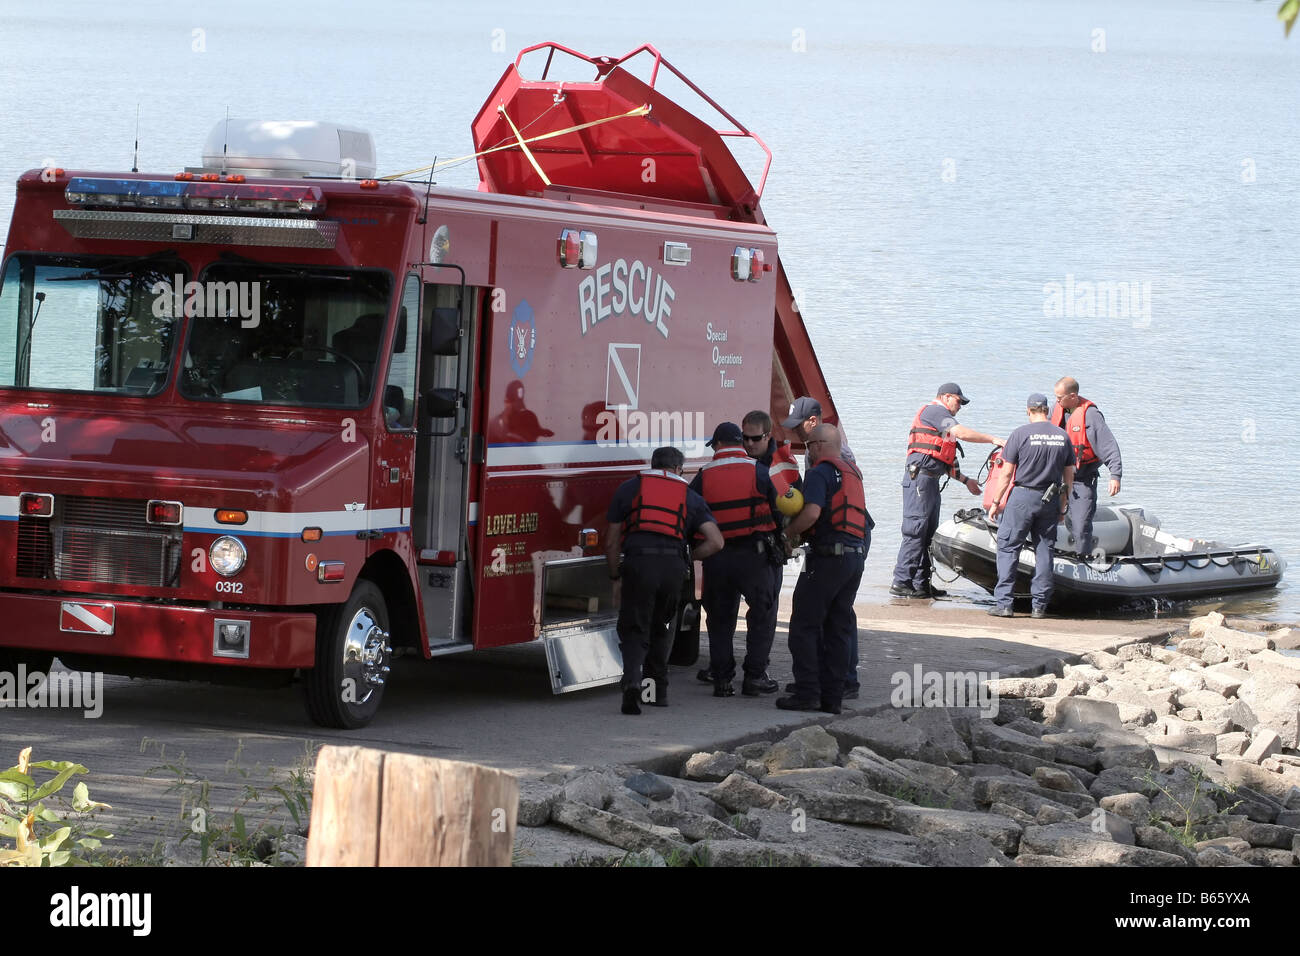 Fire search and rescue team at a lake rescue Stock Photo